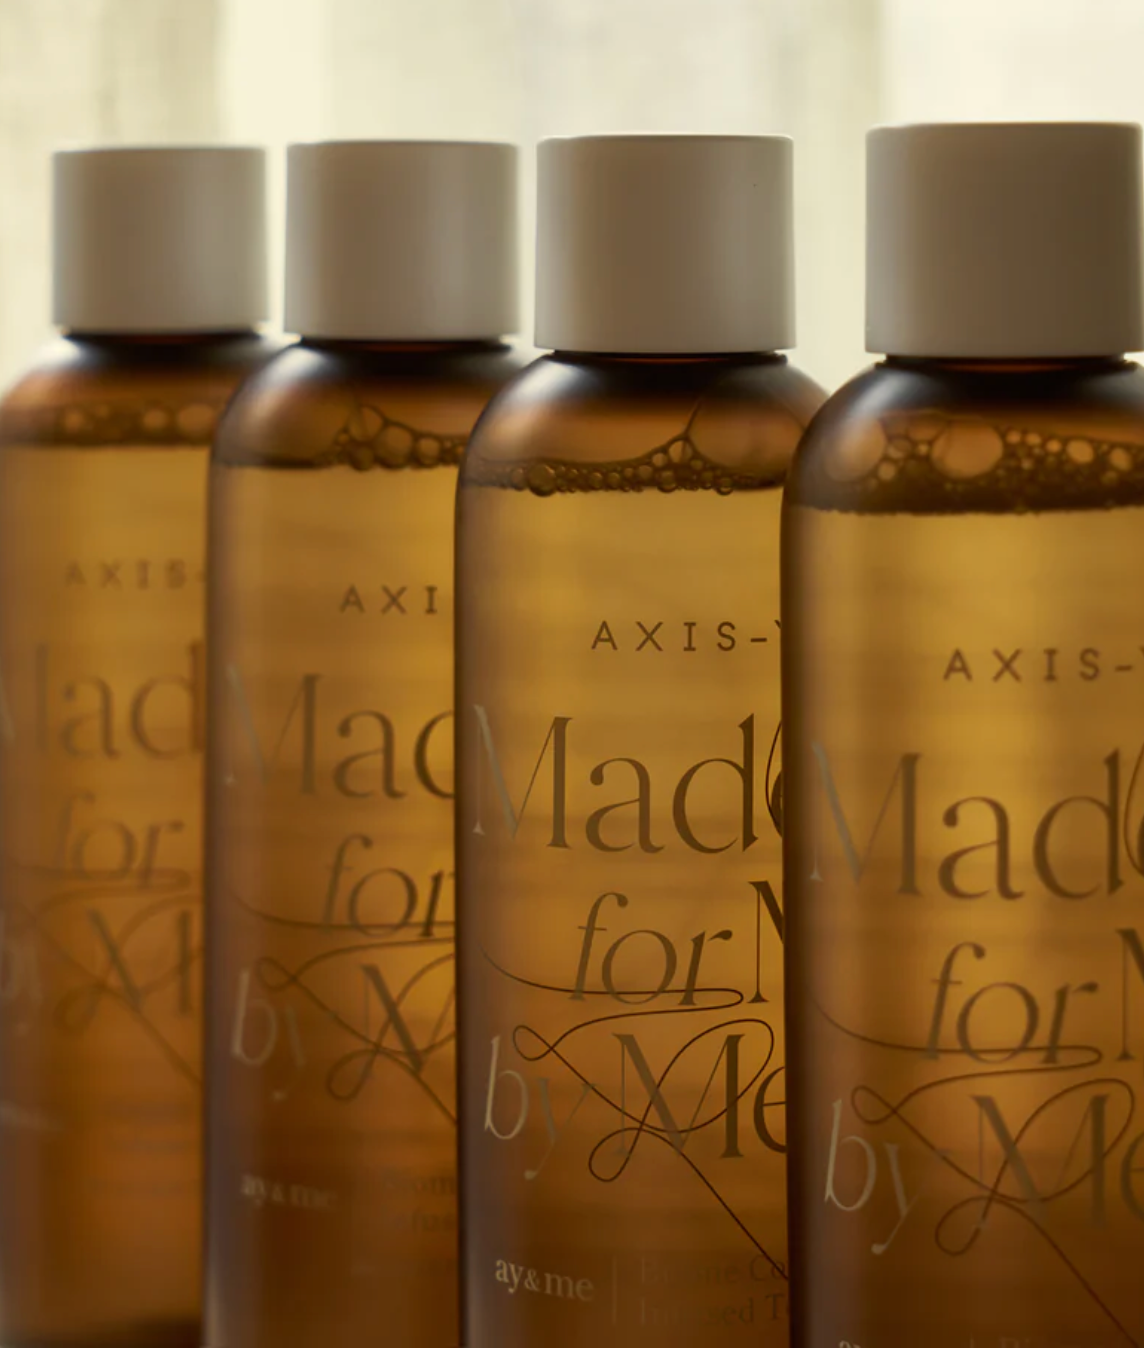 AXIS-Y Biome Comforting Infused Toner